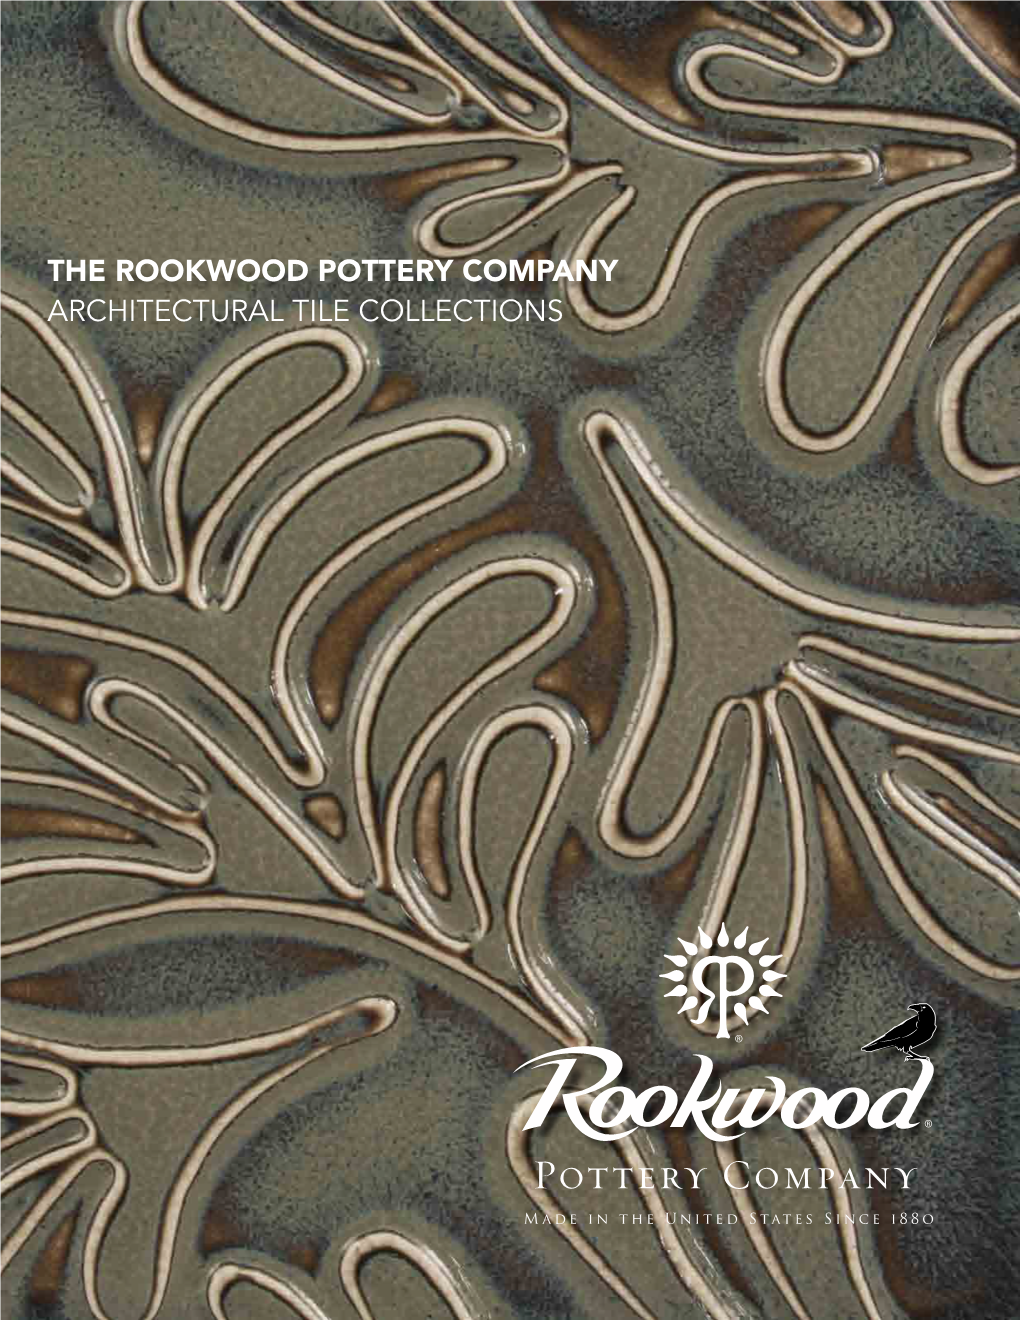 THE Rookwood Pottery Company Architectural Tile Collections